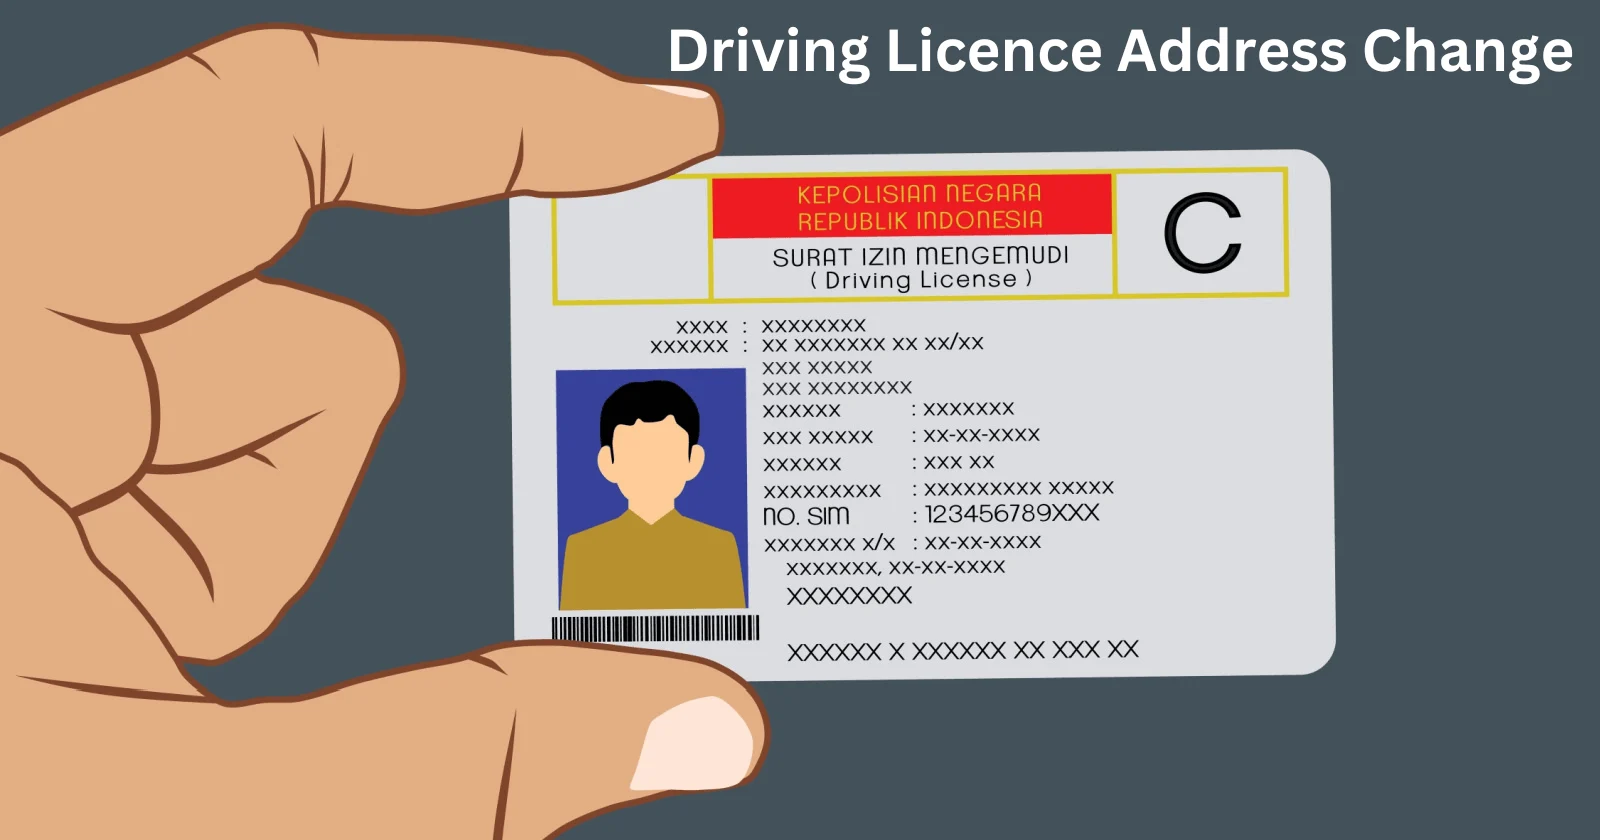 DL (Driving Licence) Address Change: How to Change and Documents Required